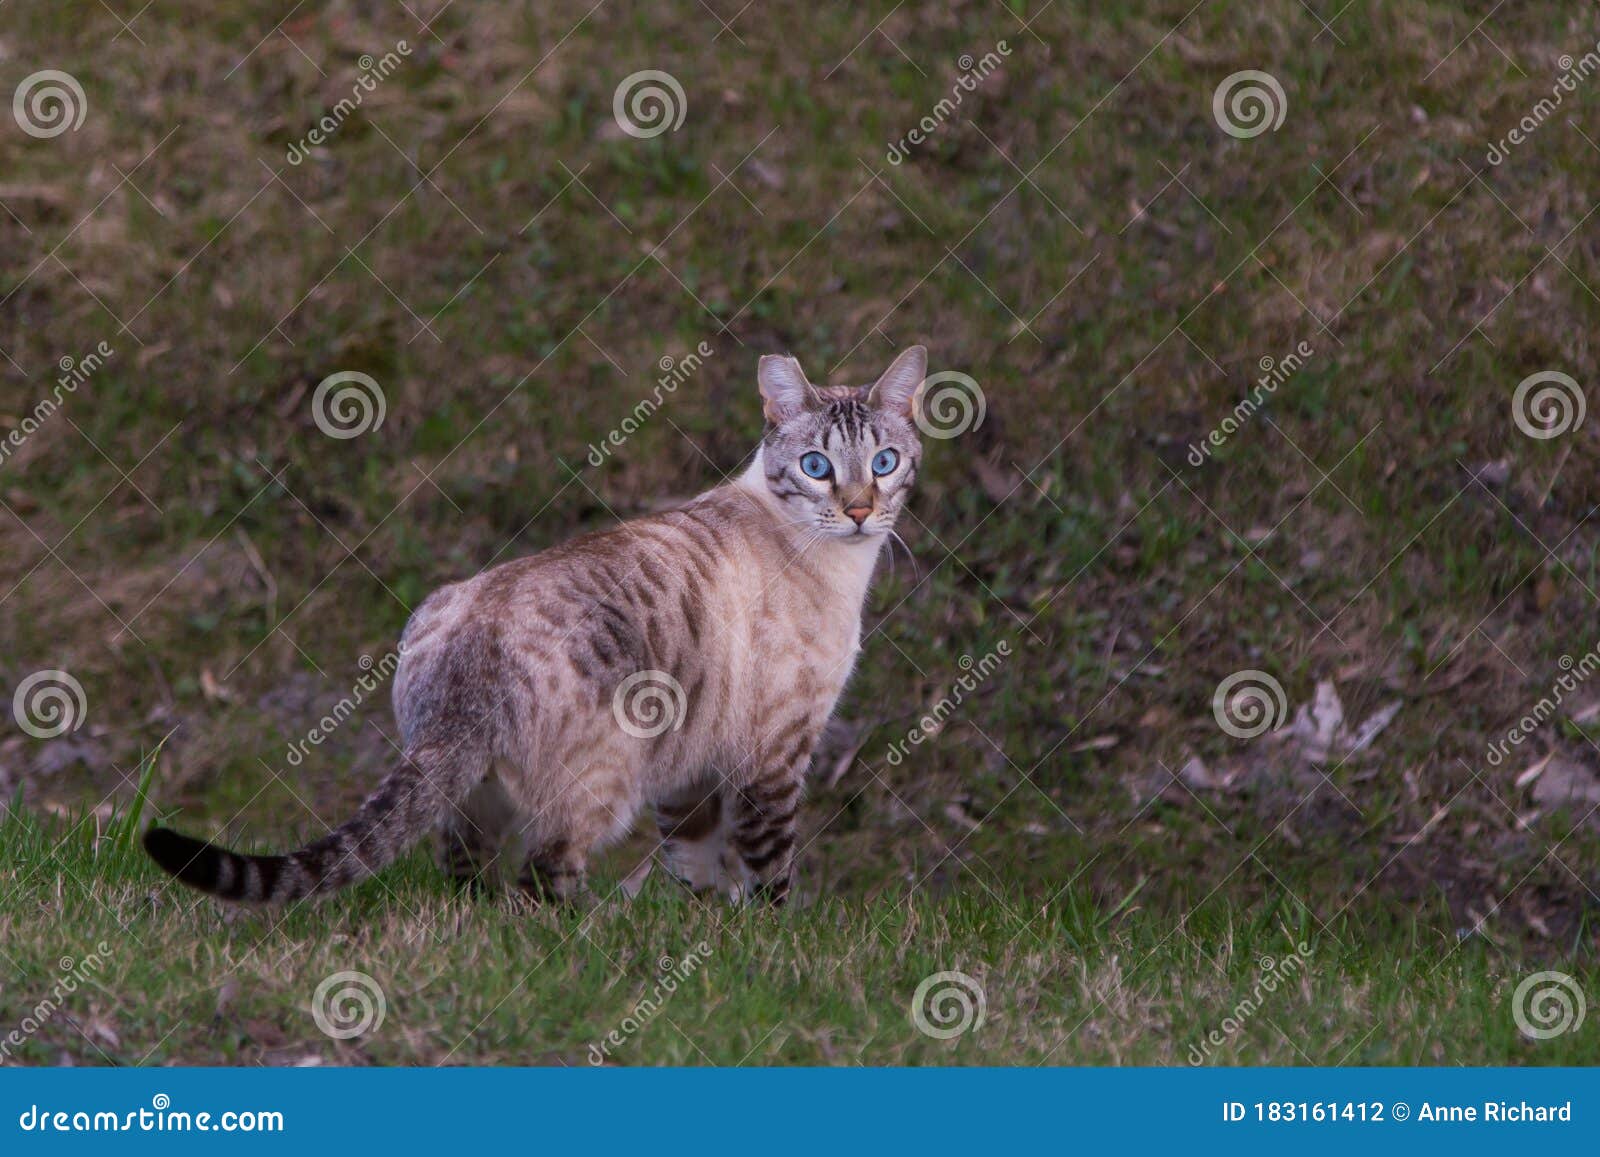 striking rare ojos azules spotted cat with part of right ear missing looking back